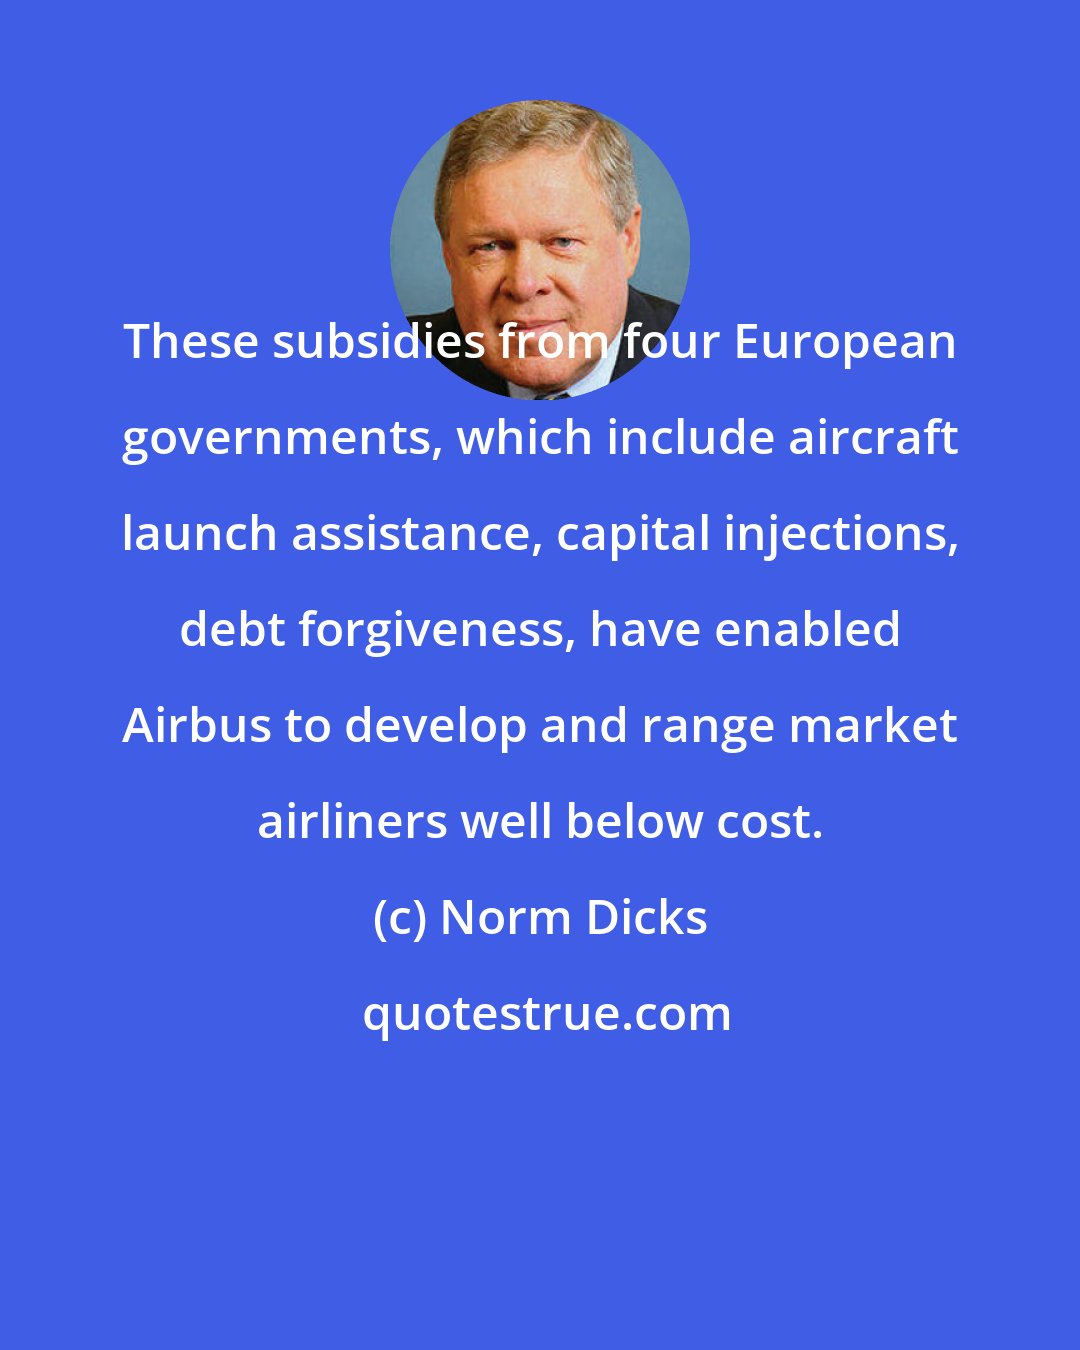 Norm Dicks: These subsidies from four European governments, which include aircraft launch assistance, capital injections, debt forgiveness, have enabled Airbus to develop and range market airliners well below cost.